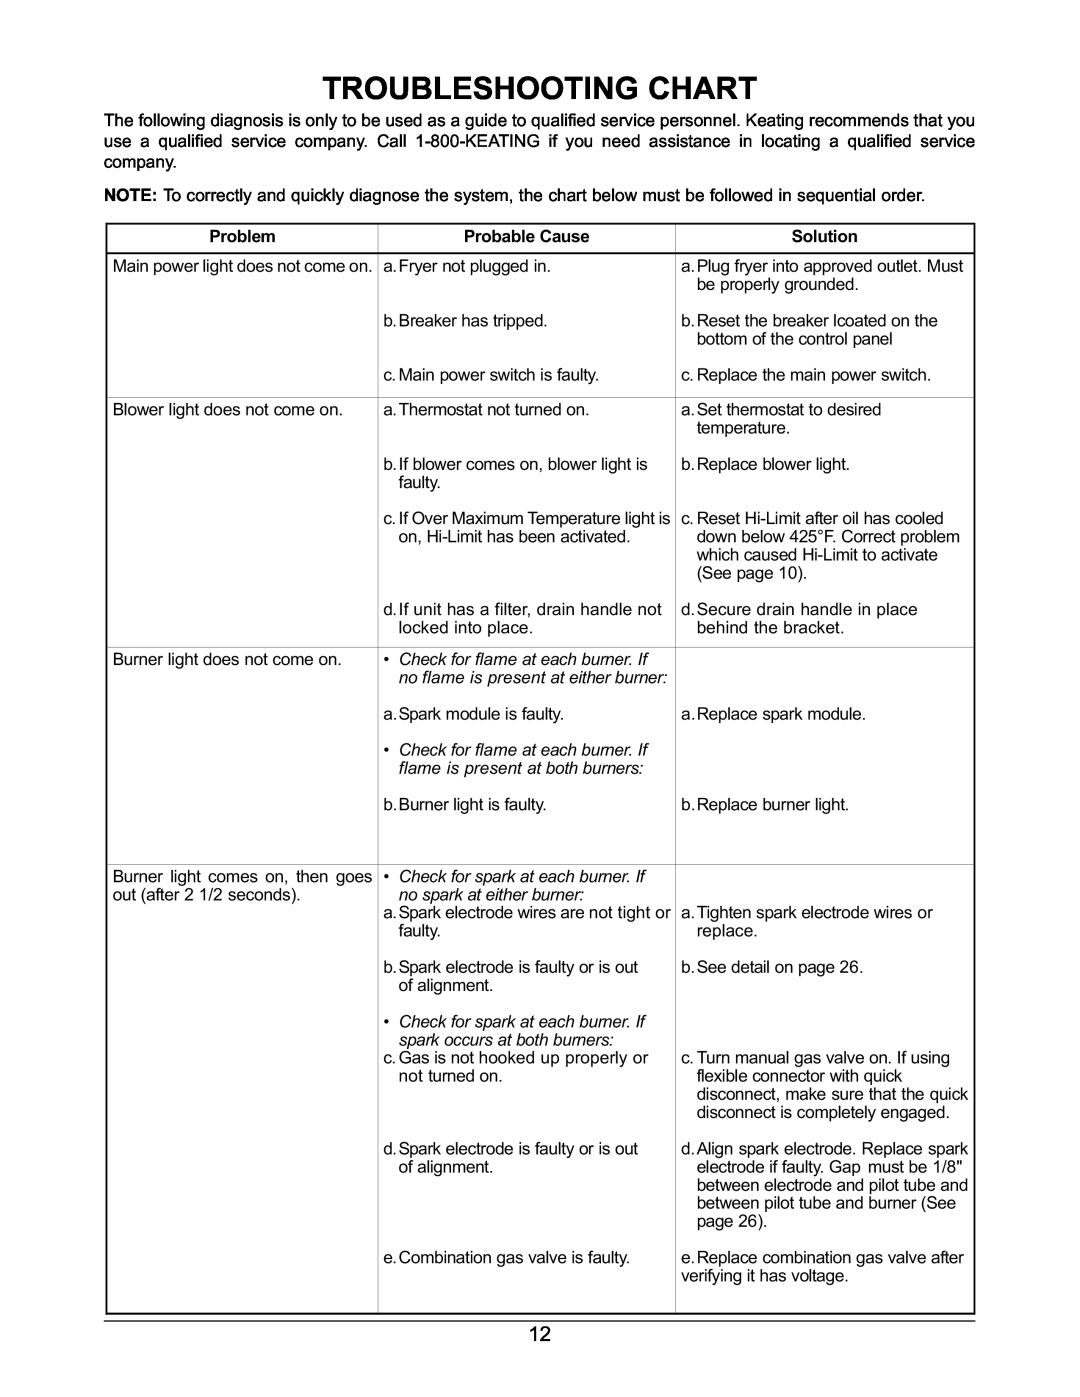 Keating Of Chicago 2006 warranty Troubleshooting Chart, Problem, Probable Cause, Solution 